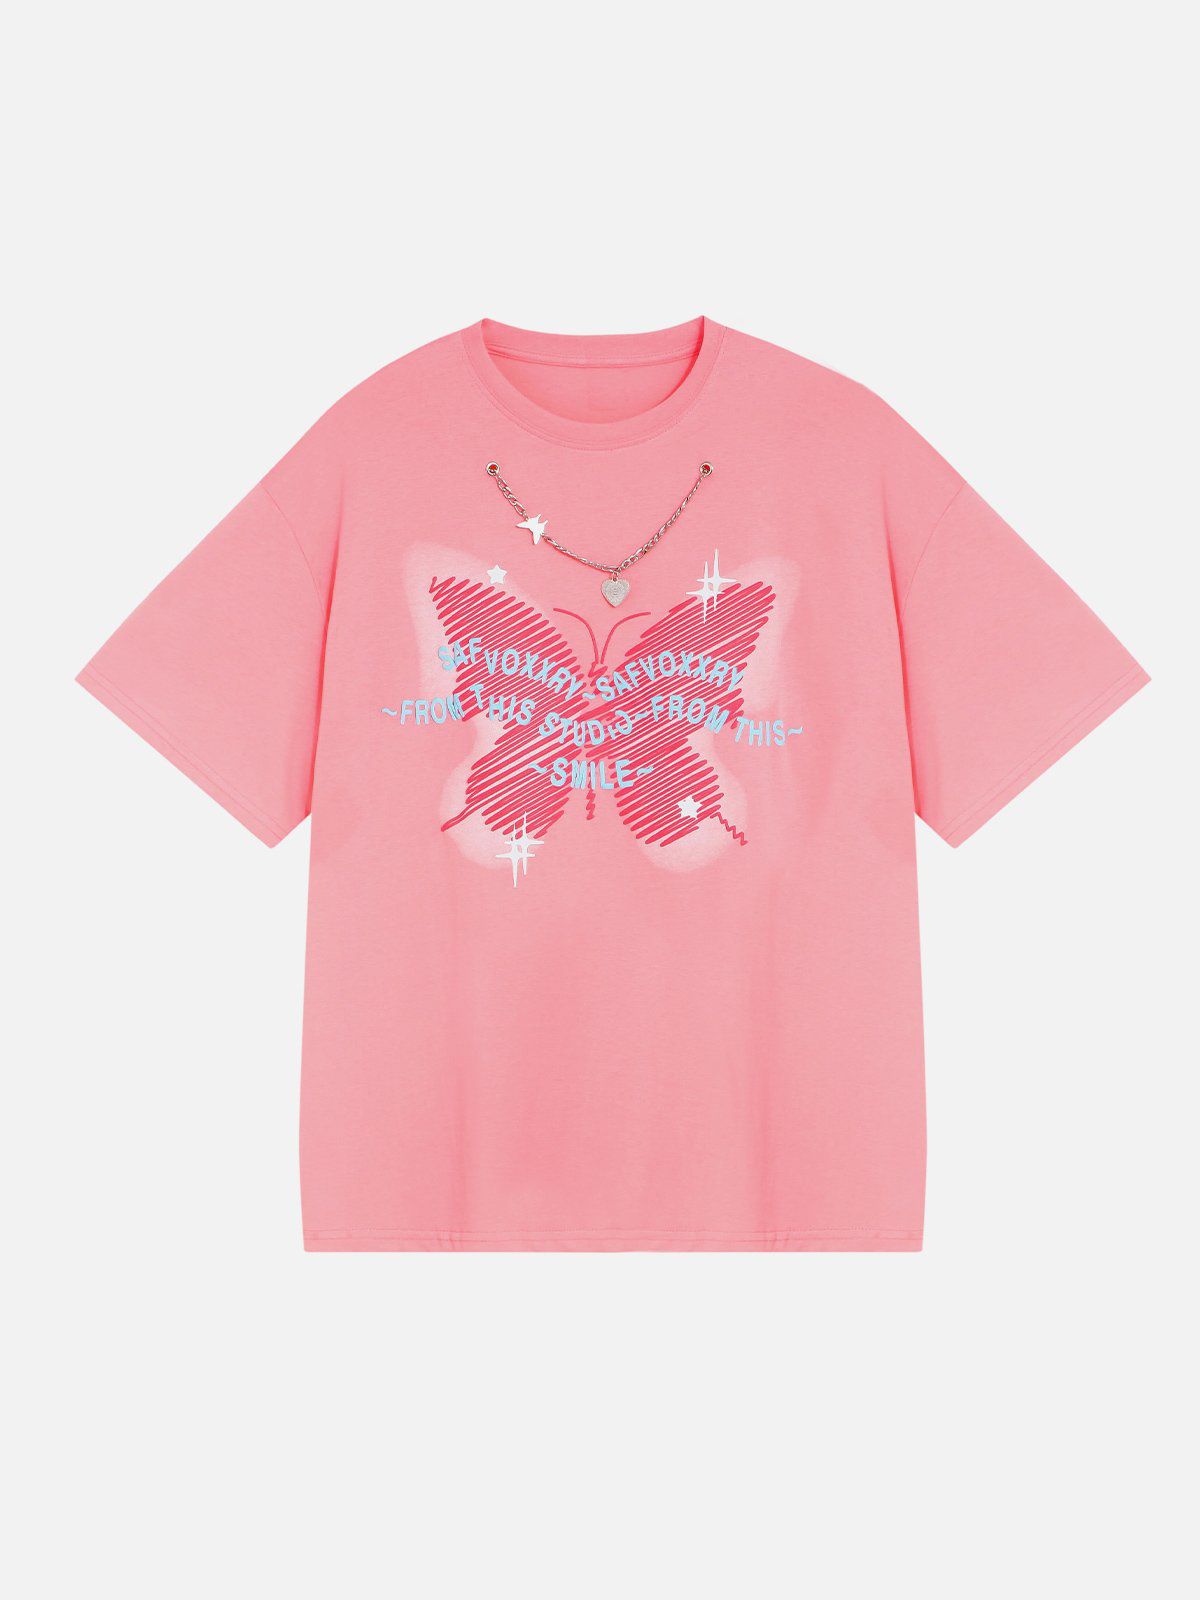 Sneakerland™ - Doodle Butterfly Print Tee